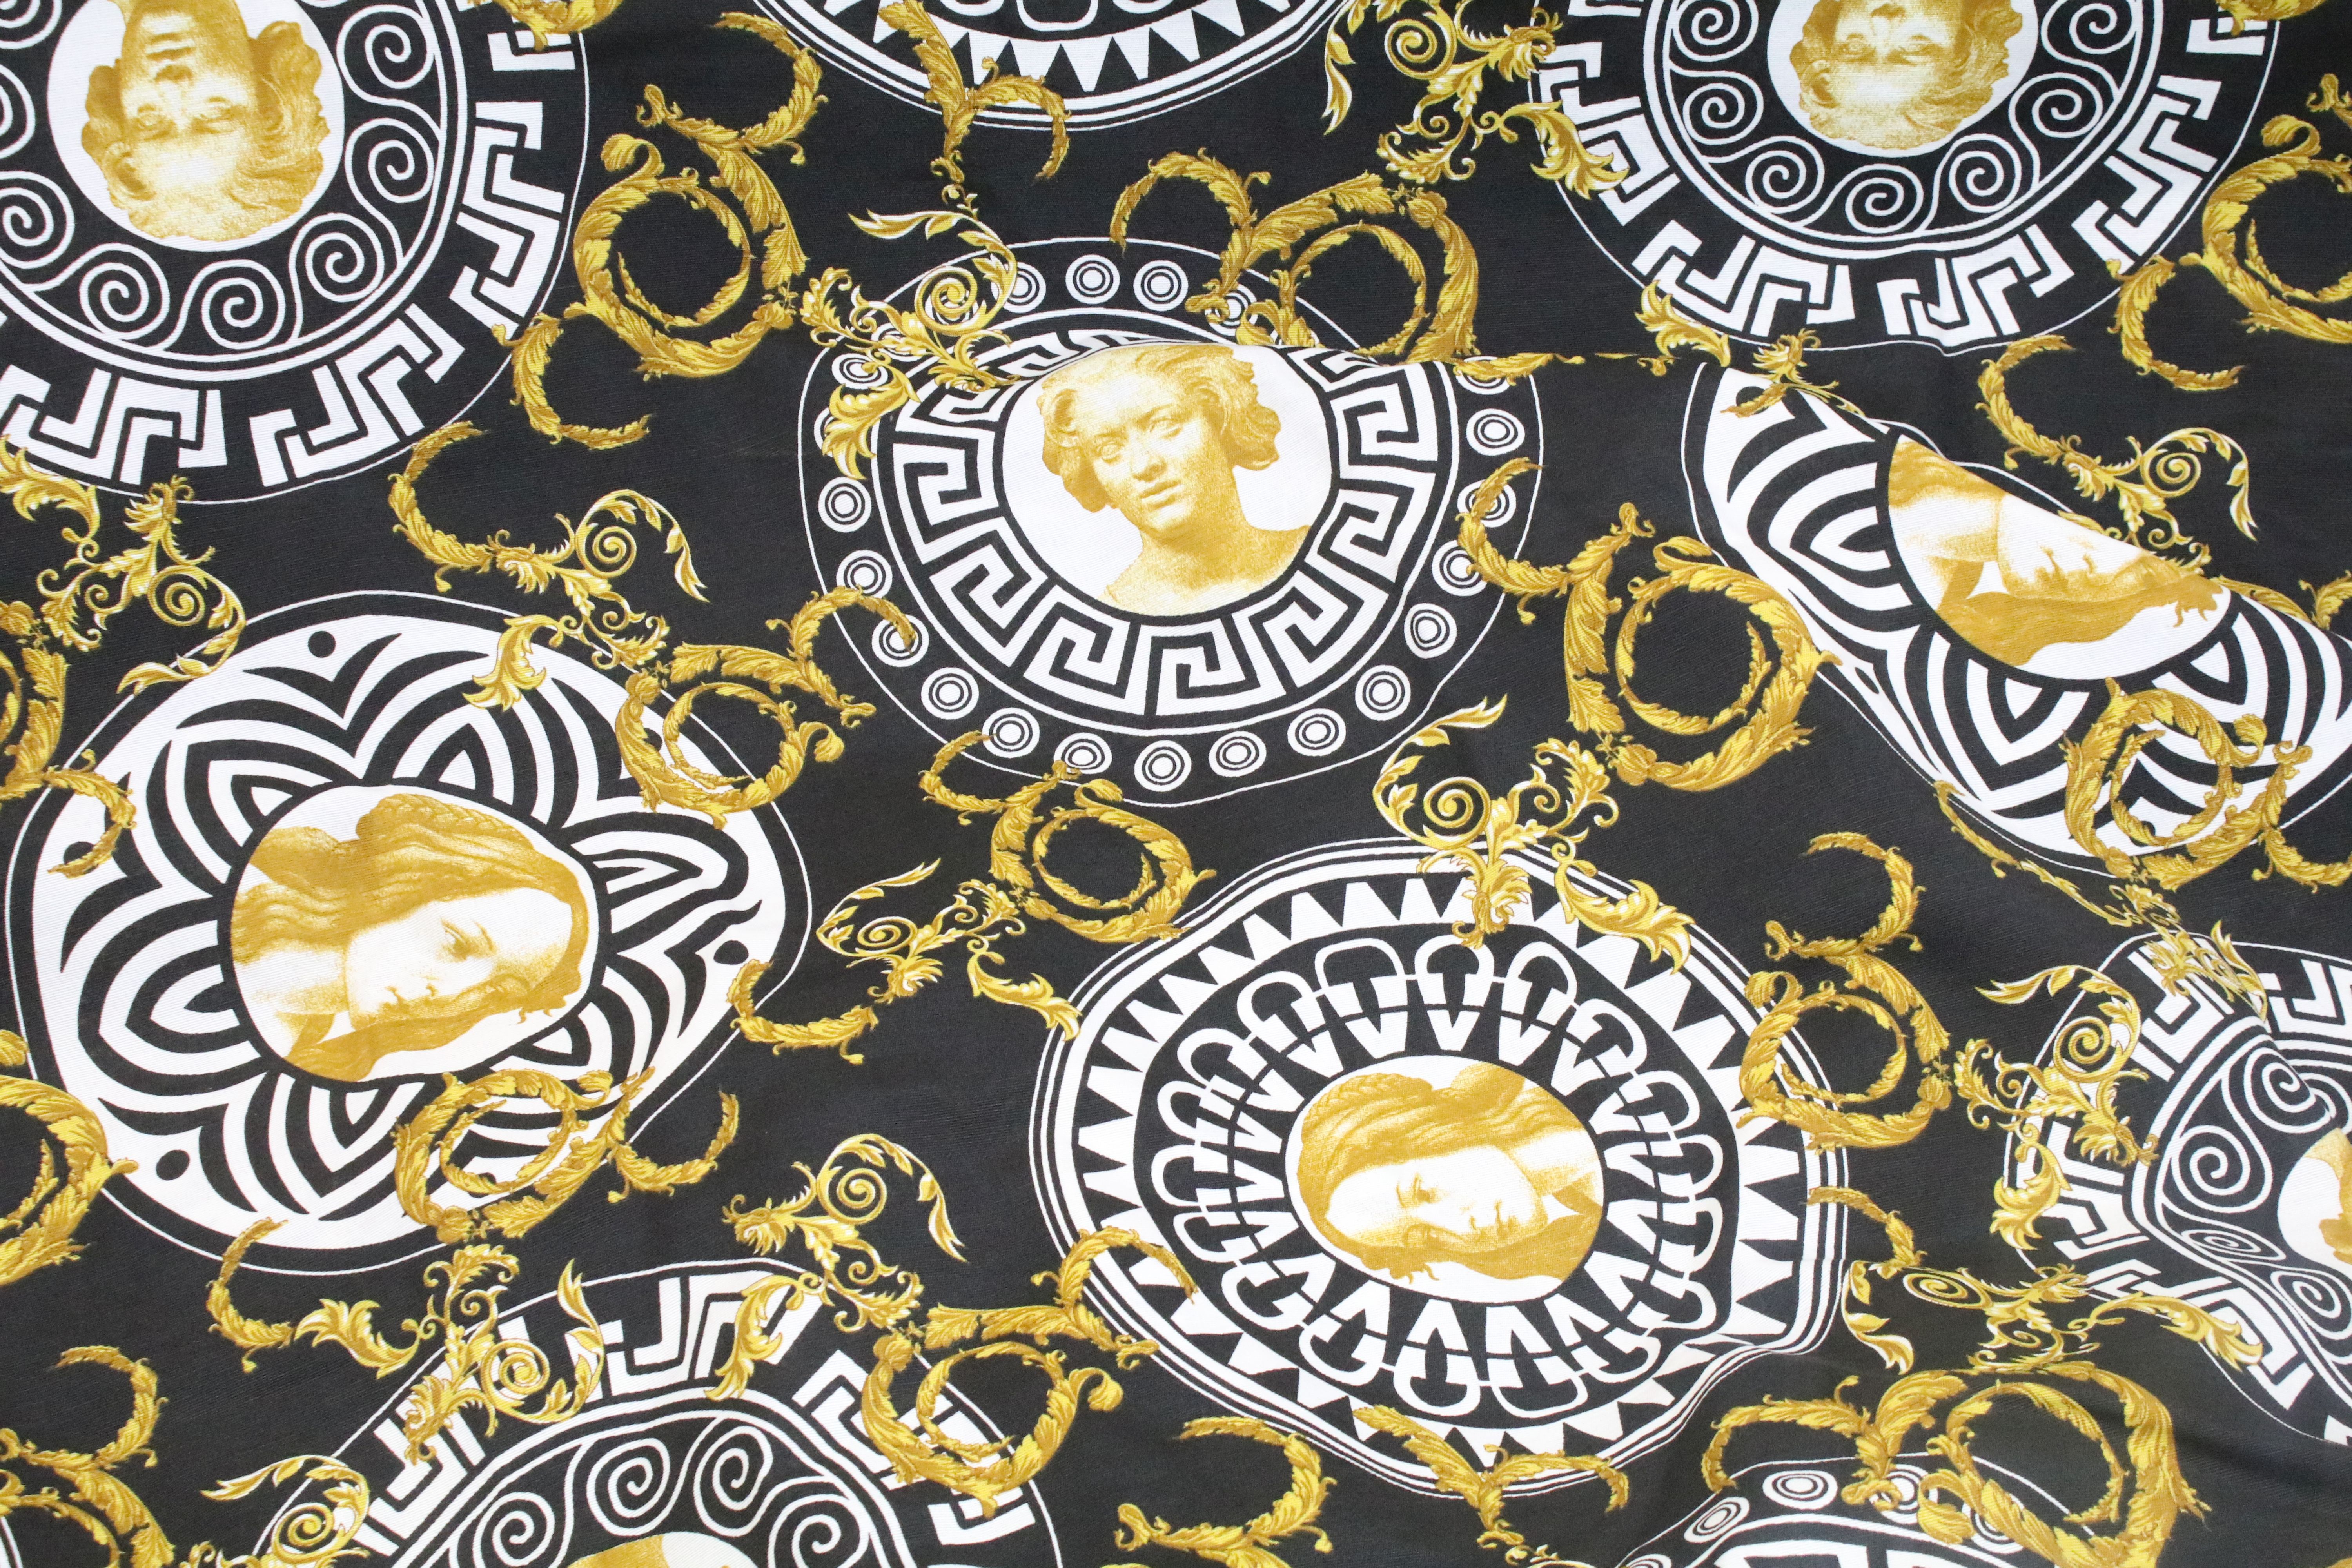 Large piece of black ground Versace style fabric, with repeating spiralling gold acanthus leaves - Image 4 of 5